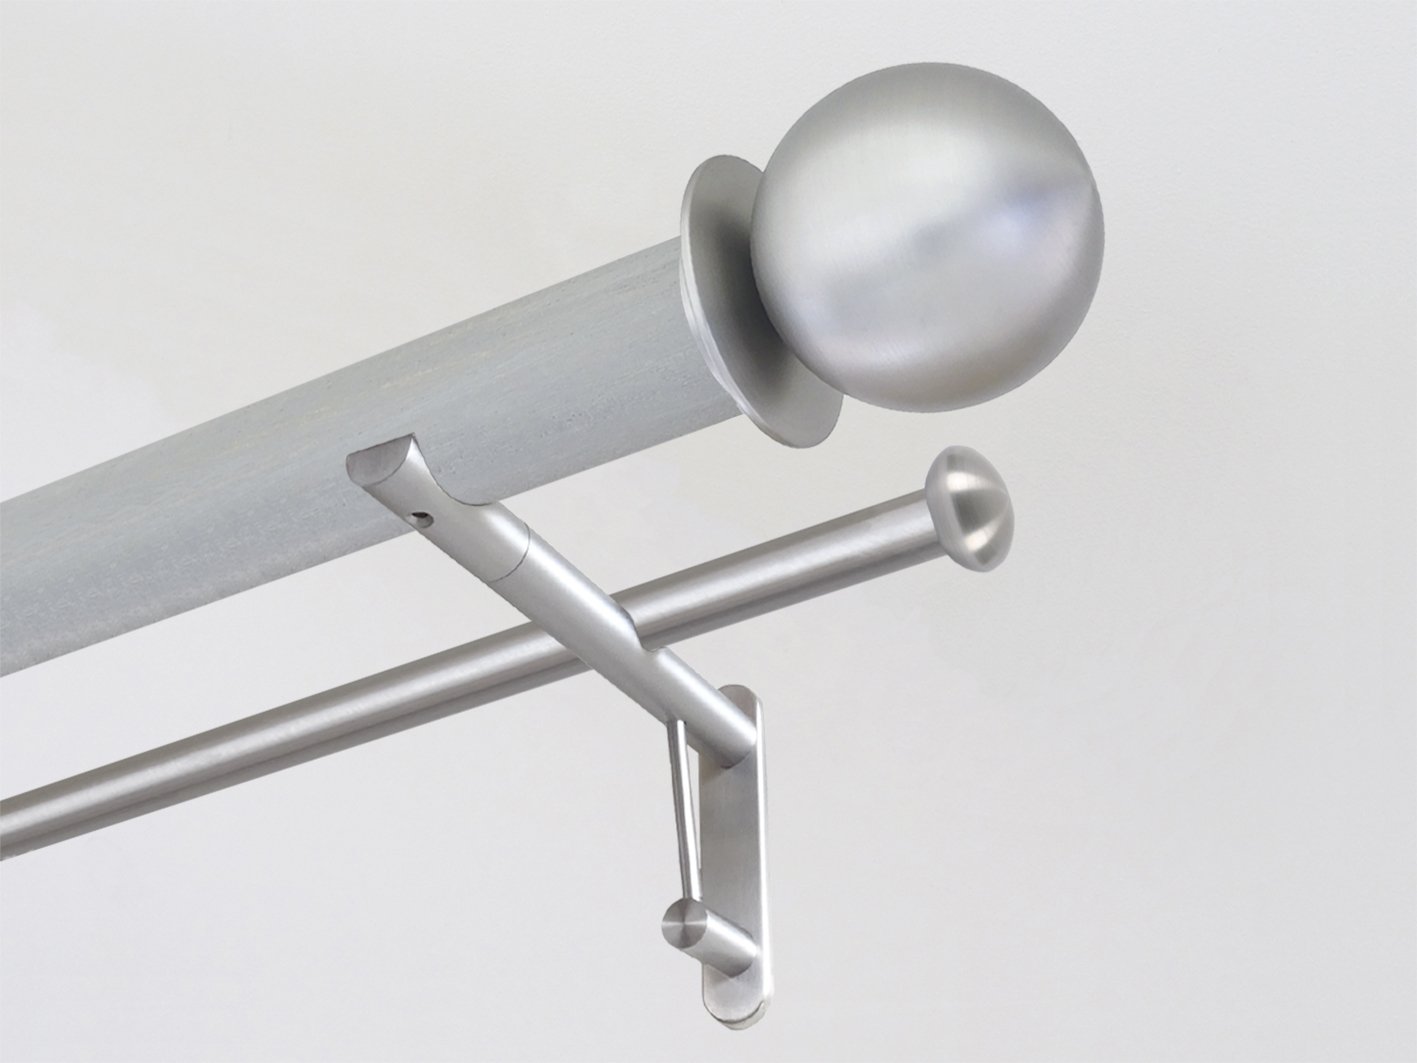 50mm dia. wood pigeon stained wood duo curtain pole system with steel metal ball finials